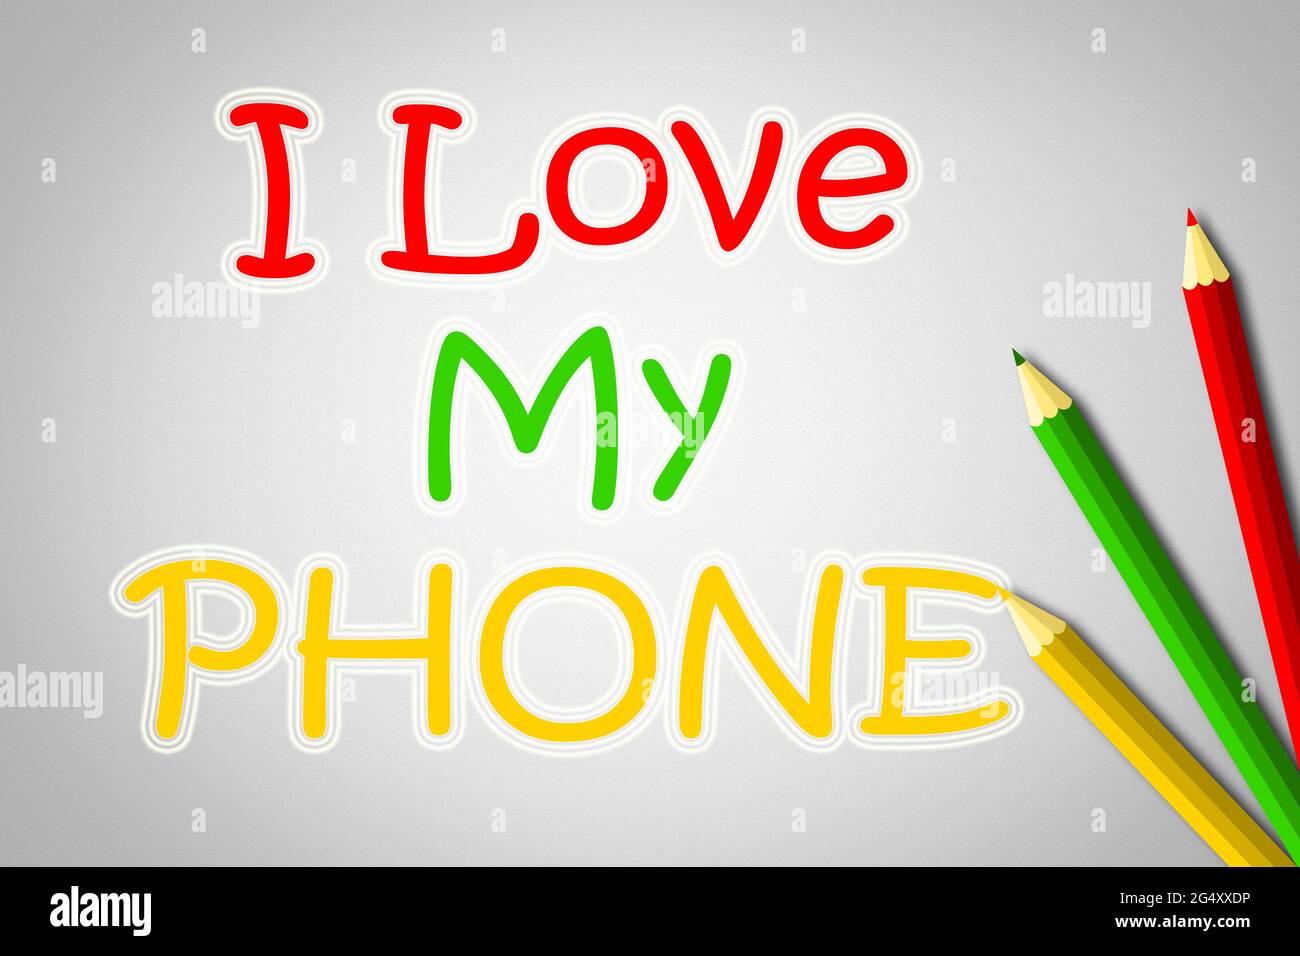 I Love My Phone Concept text on background Foto Stock